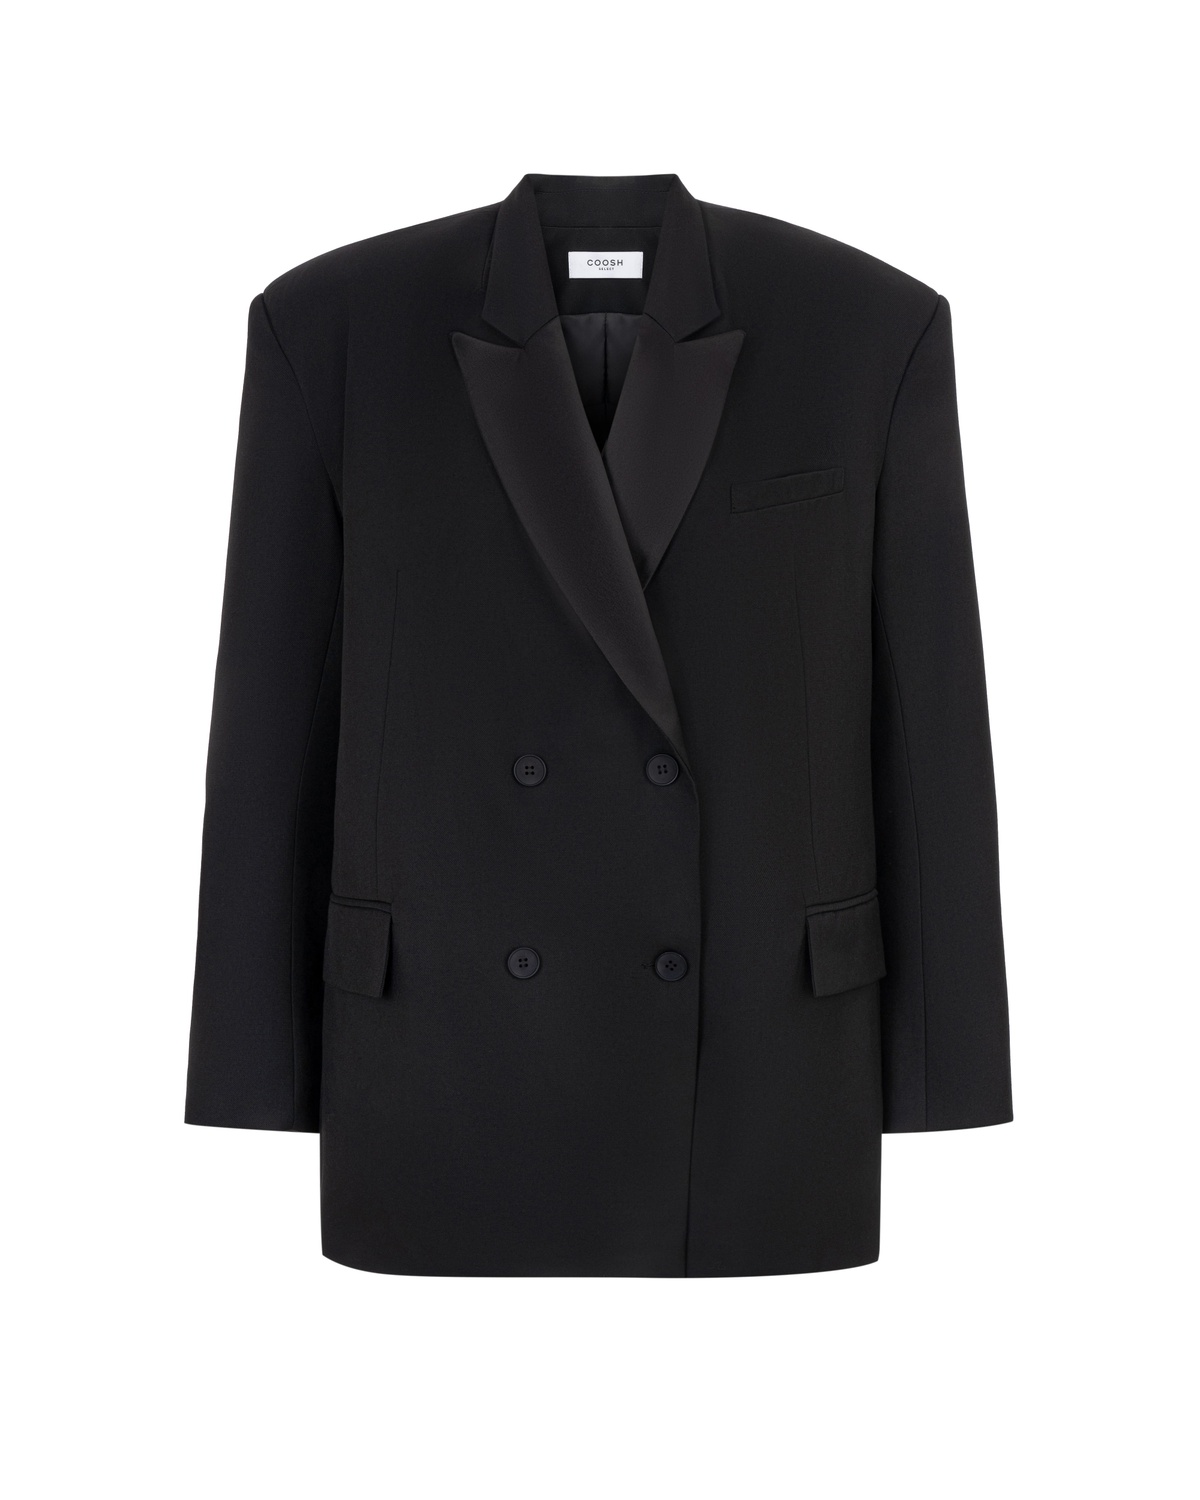 Oversized Double-Breasted Blazer with Satin Lapels